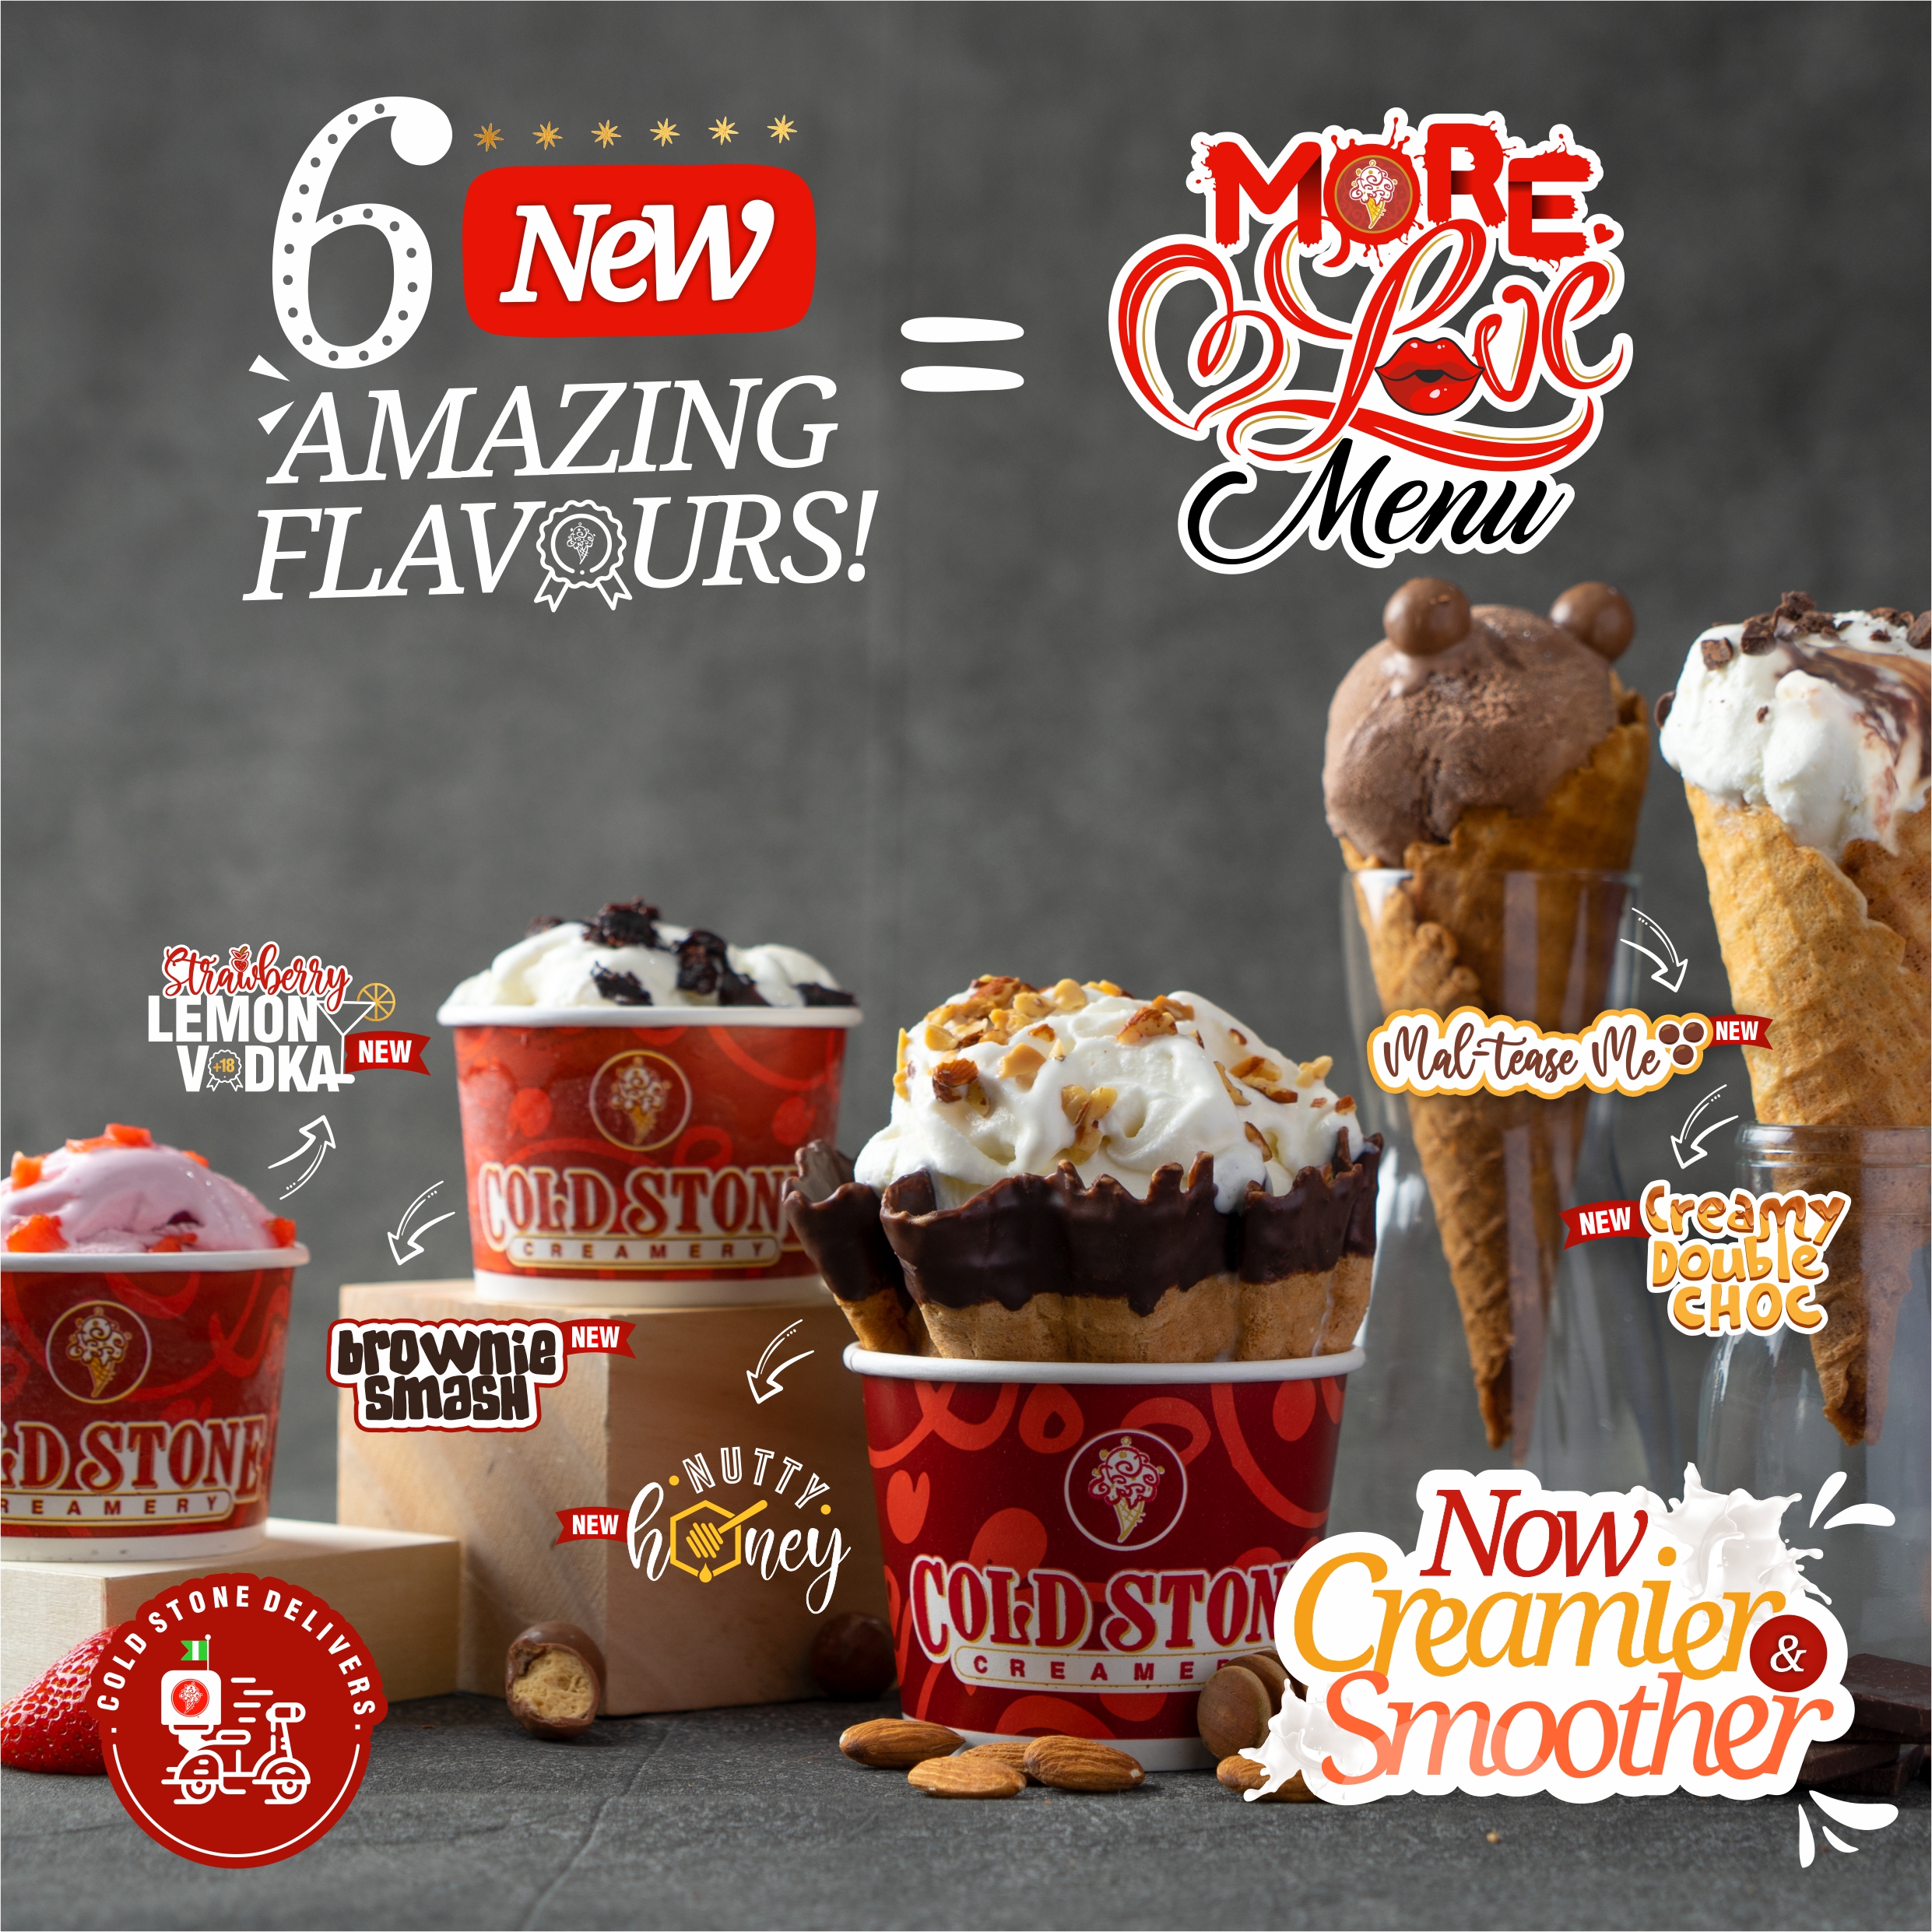 6 New Flavors! That's what Cold Stone Creamery is giving you with it's